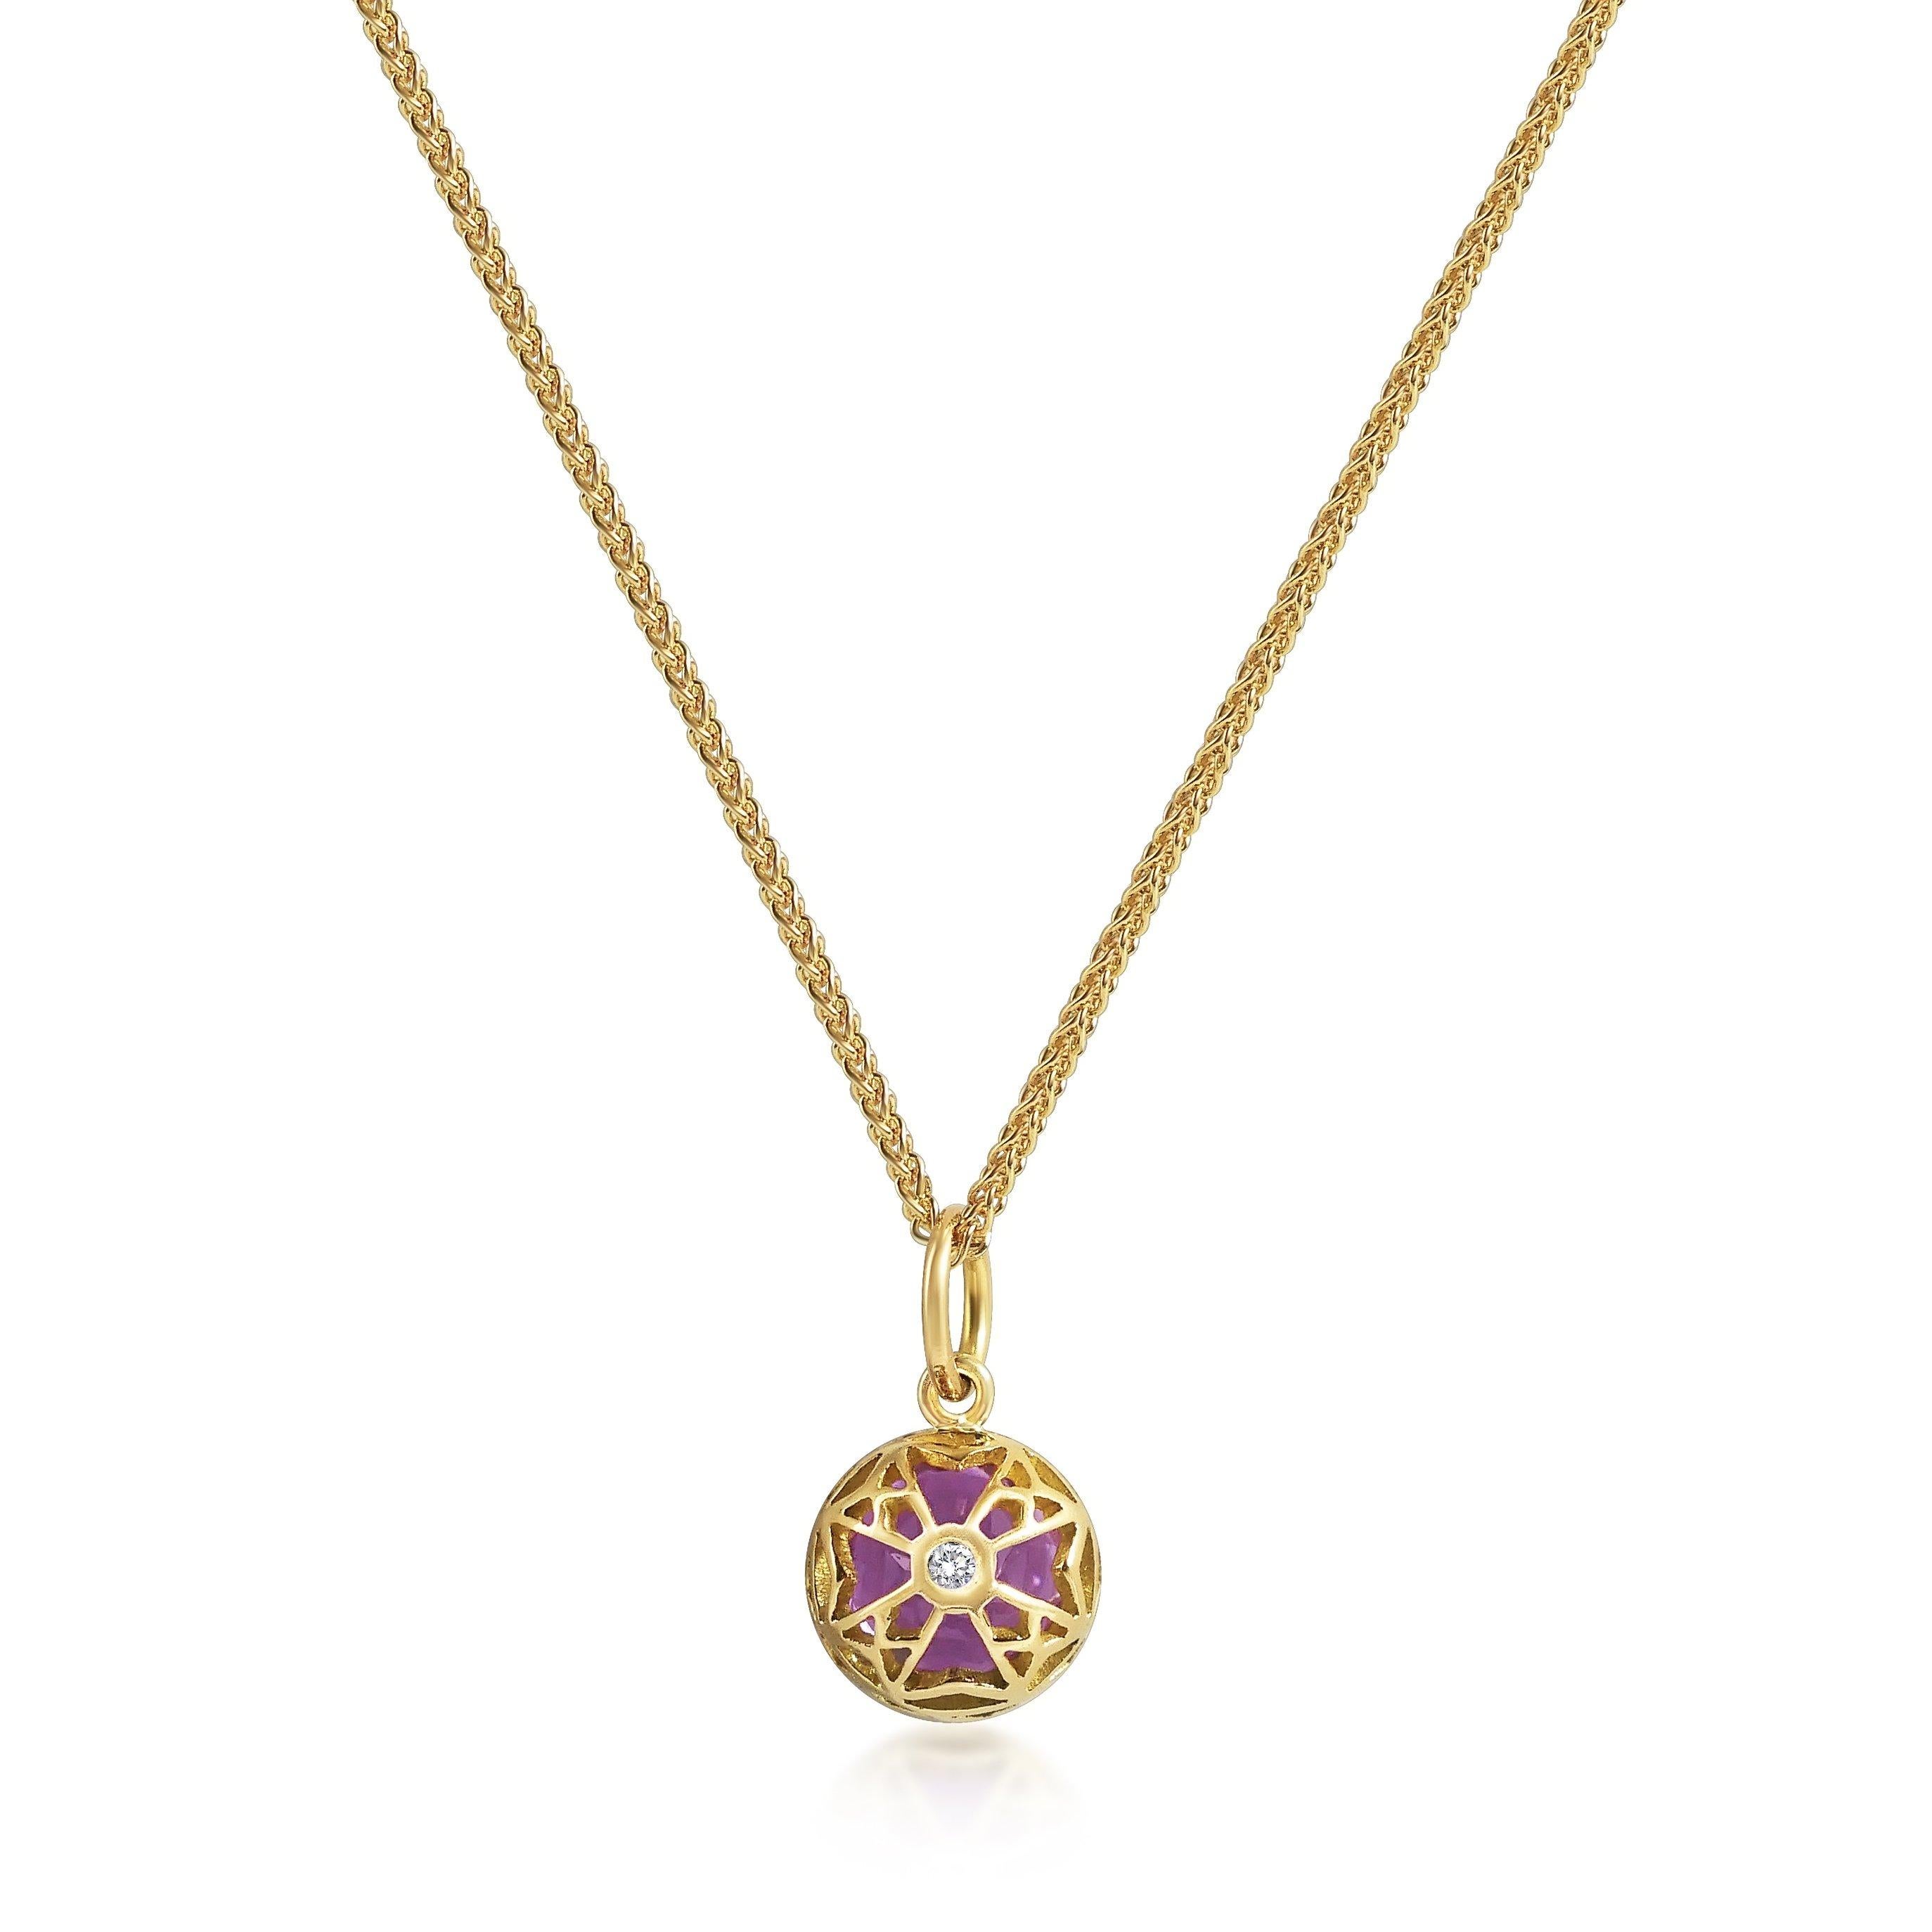 Handcrafted 1.20 Carats Amethyst 18 Karat Yellow Gold Pendant Necklace. The 7mm natural stone is set in our iconic hand pierced gold lace to let the light through. Our pendants are the ideal gift. 

Here presented on our finely knitted gold chains.